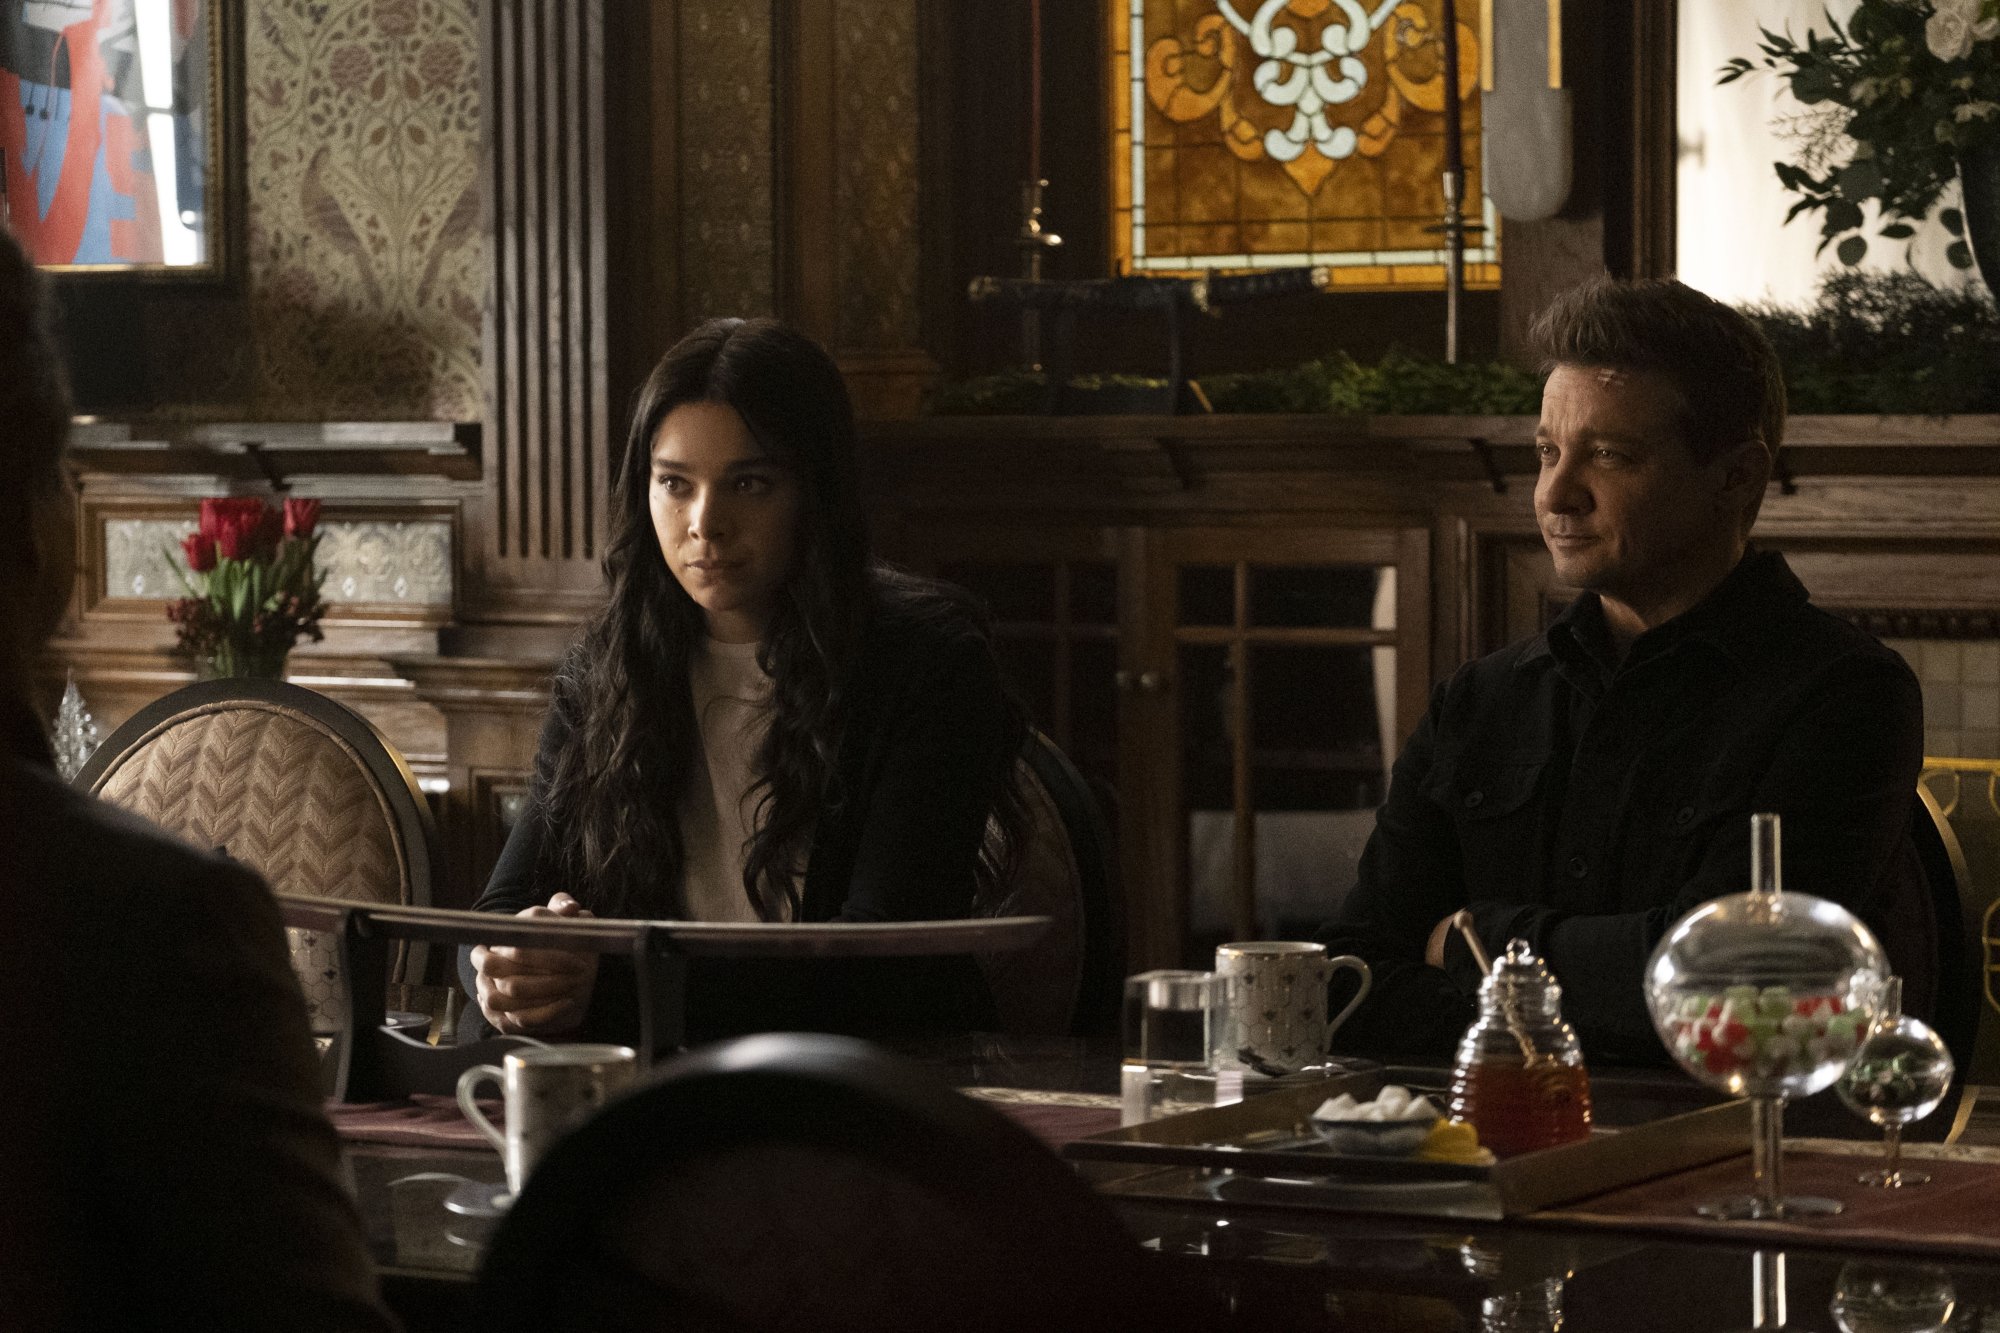 Hailee Steinfeld and Jeremy Renner as Kate Bishop and Clint Barton in 'Hawkeye' Episode 4 on Disney+. They're sitting at a table speaking to Kate's mom and step-father.